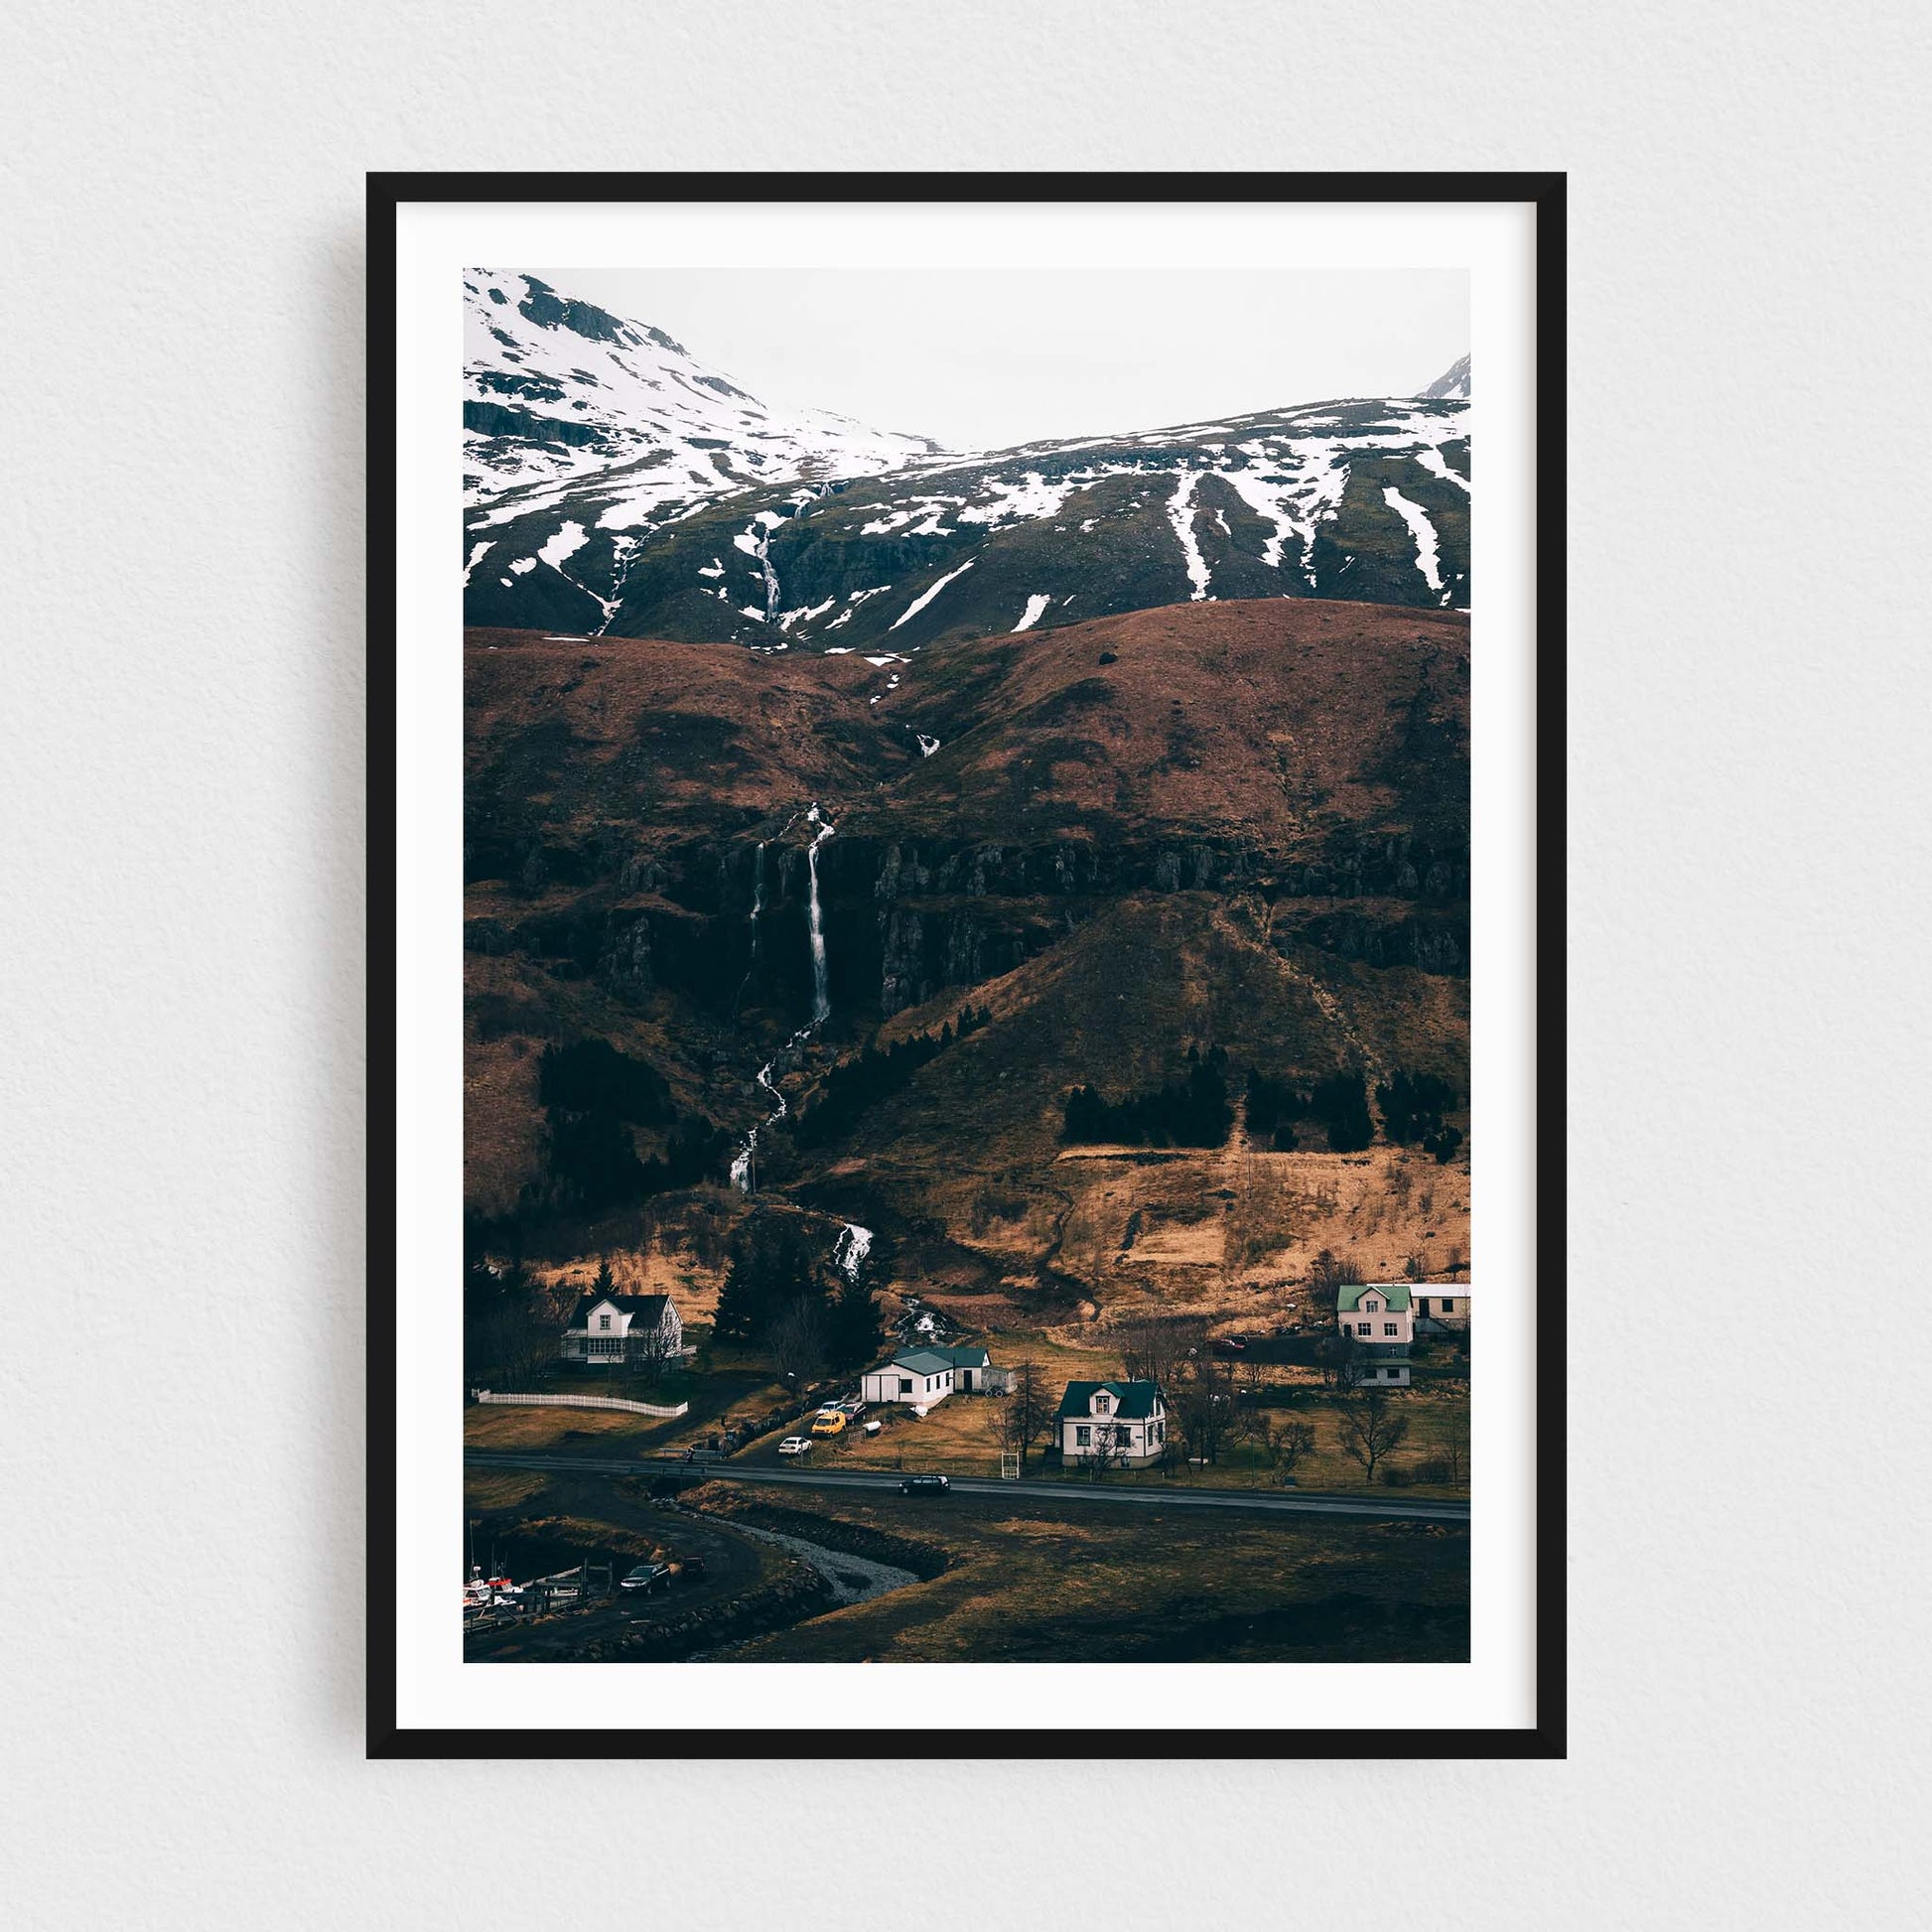 Iceland fine art photography print featuring a small fishing town Seydisfjordur